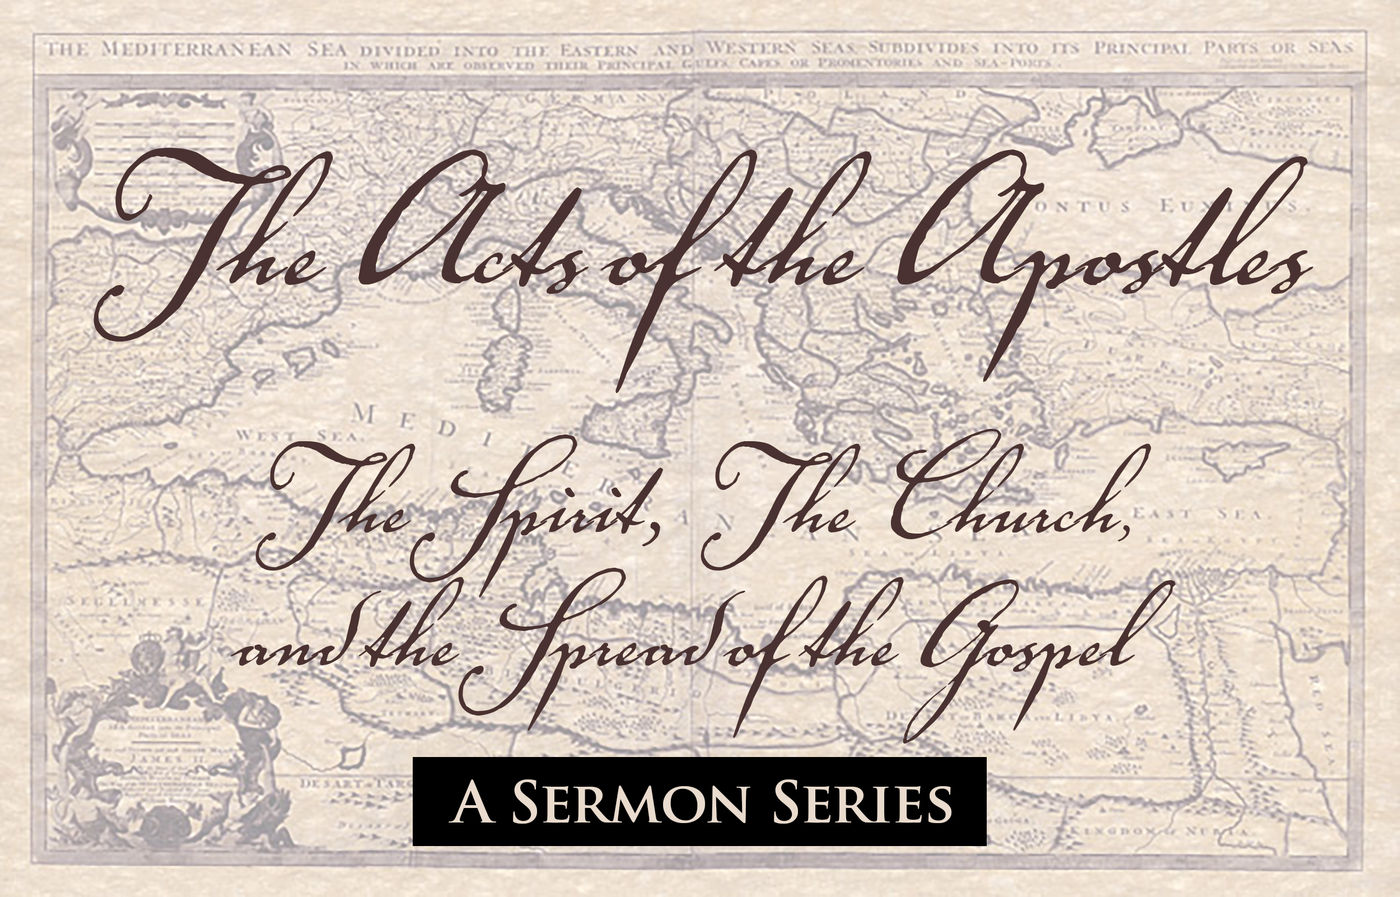 The Acts of the Apostles: The Spirit, The Church, and the Spread of the Gospel banner